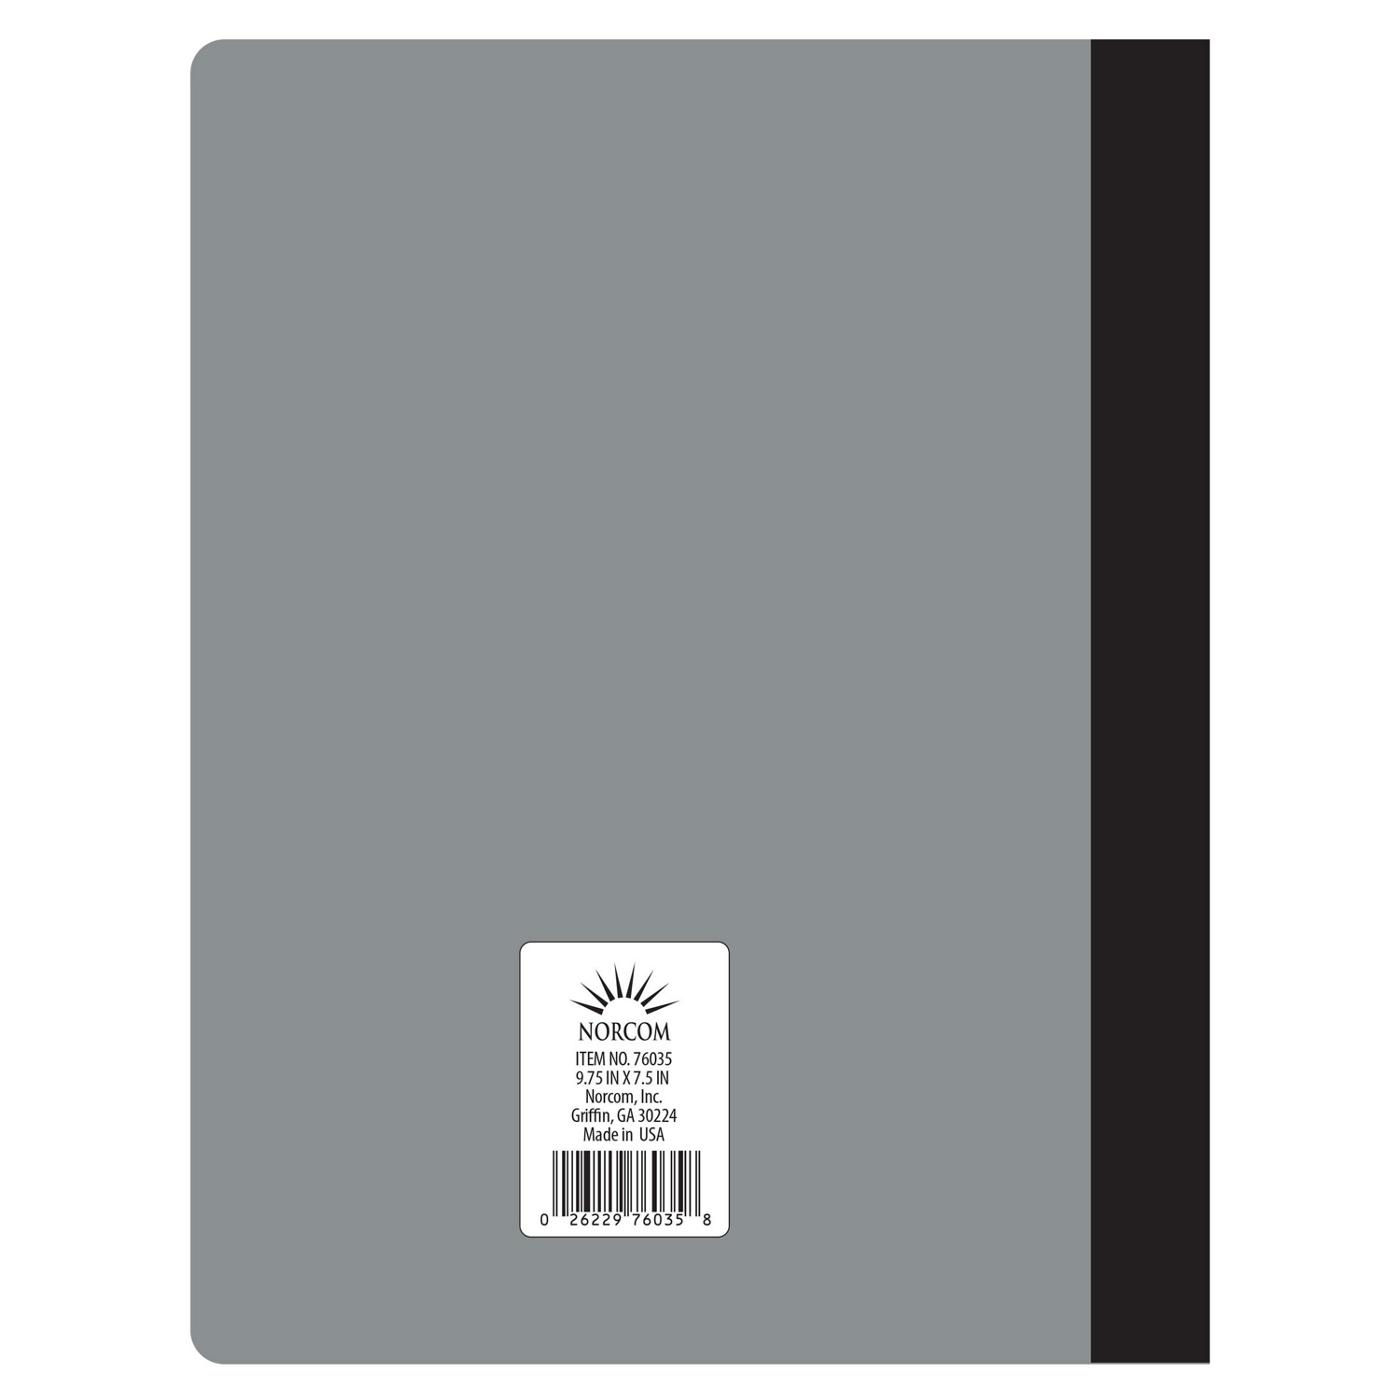 Norcom Collage Ruled Composition Notebook - Silver; image 2 of 2